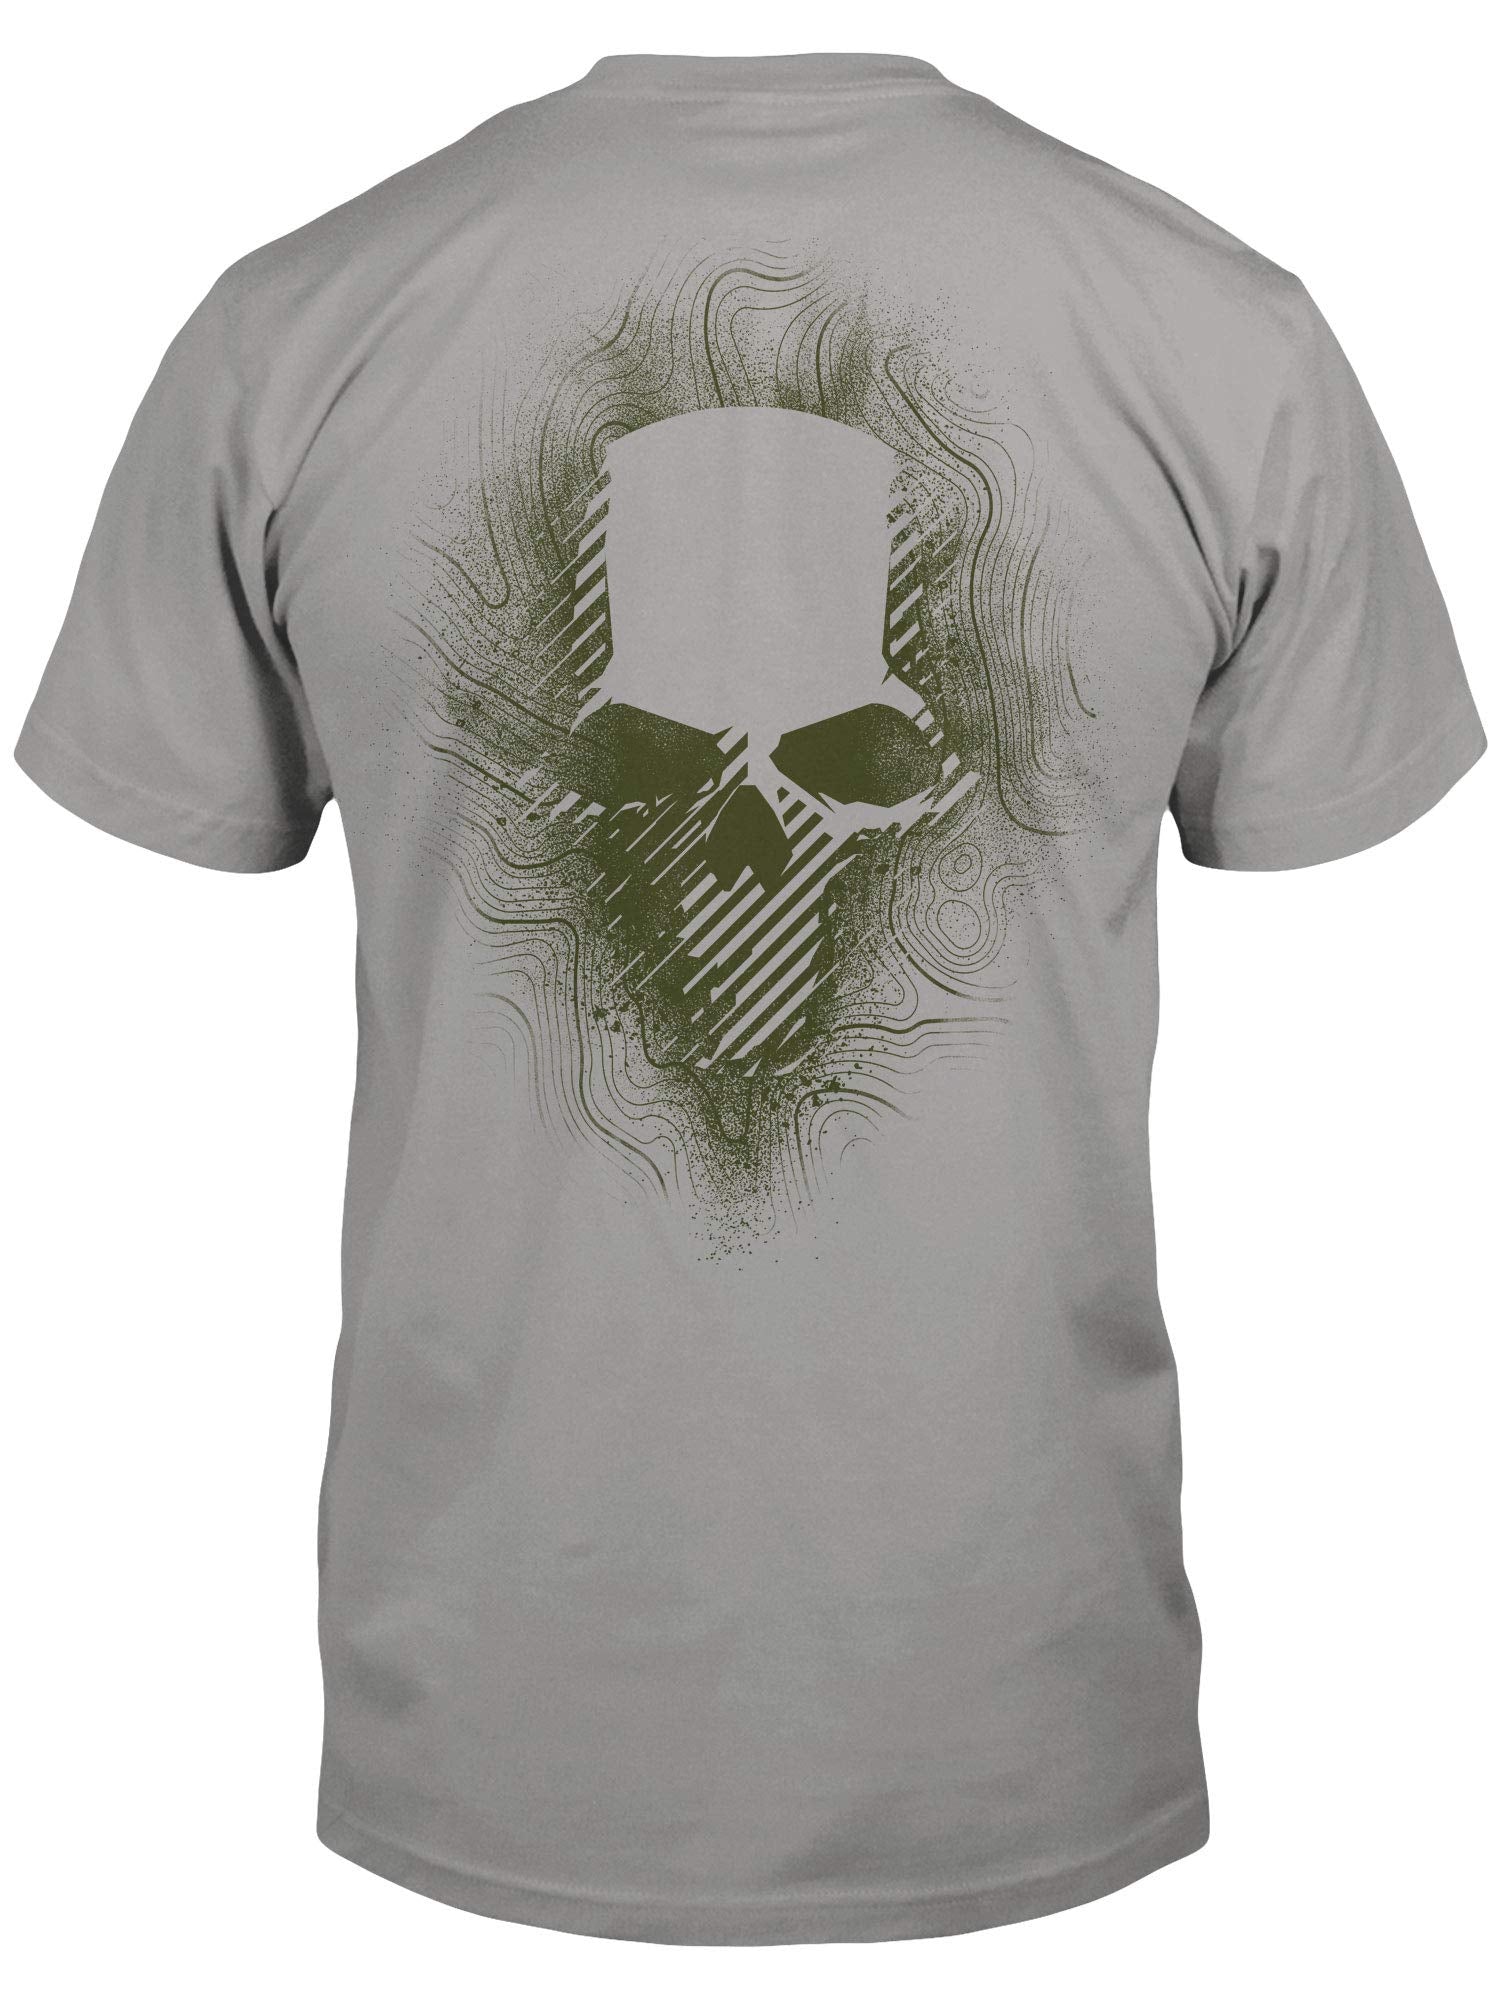 Tom Clancy's Ghost Recon Breakpoint Men's T-Shirt with Pocket